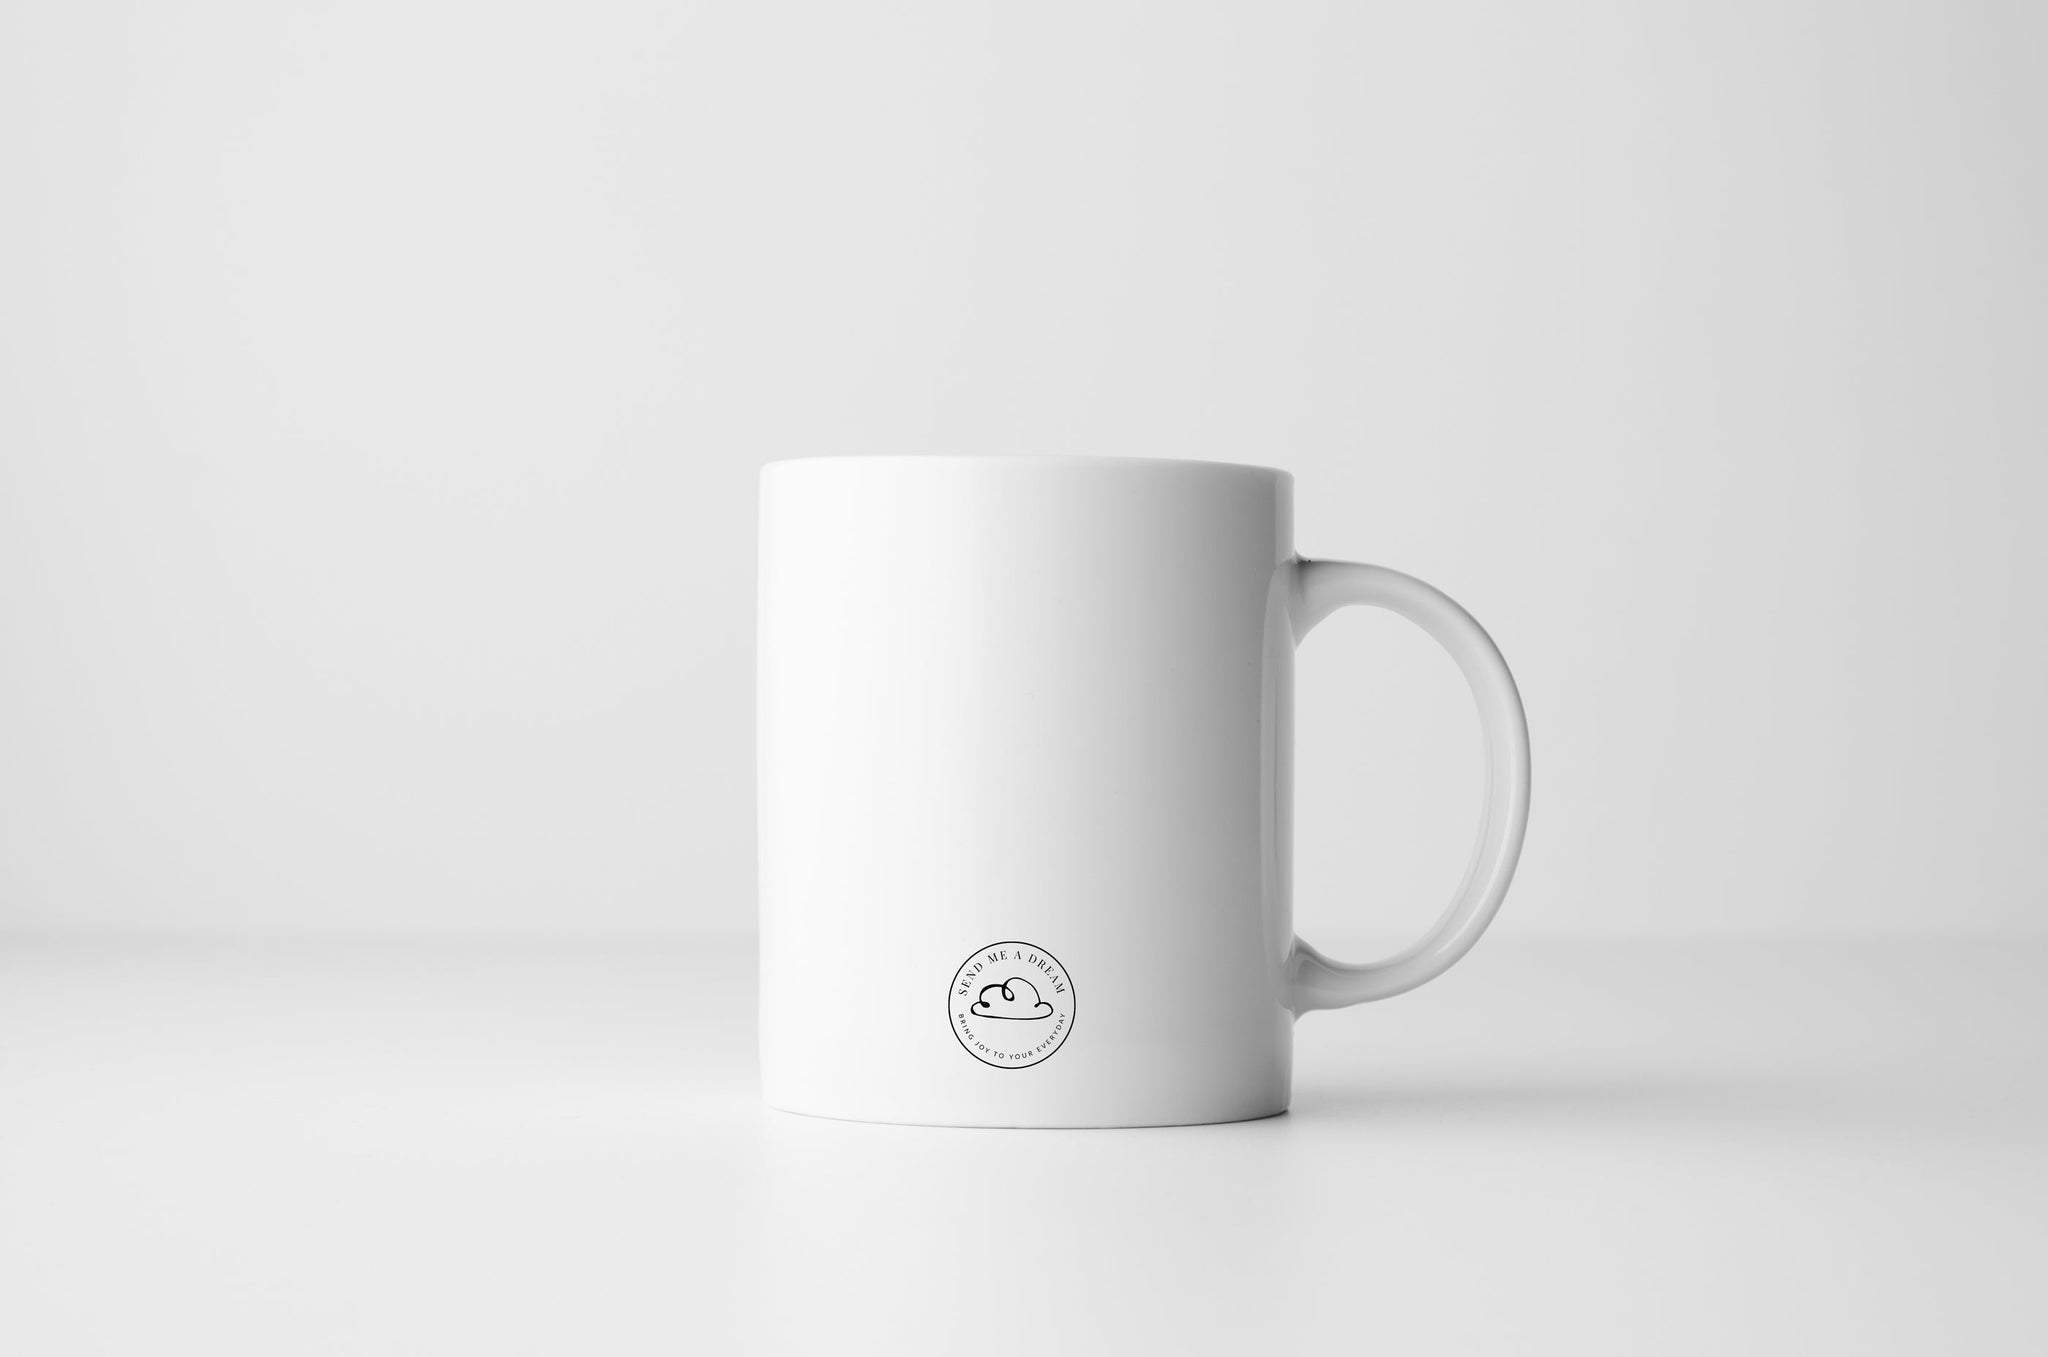 Let me Overthink This, Funny Large Coffee Mug - Send Me a Dream